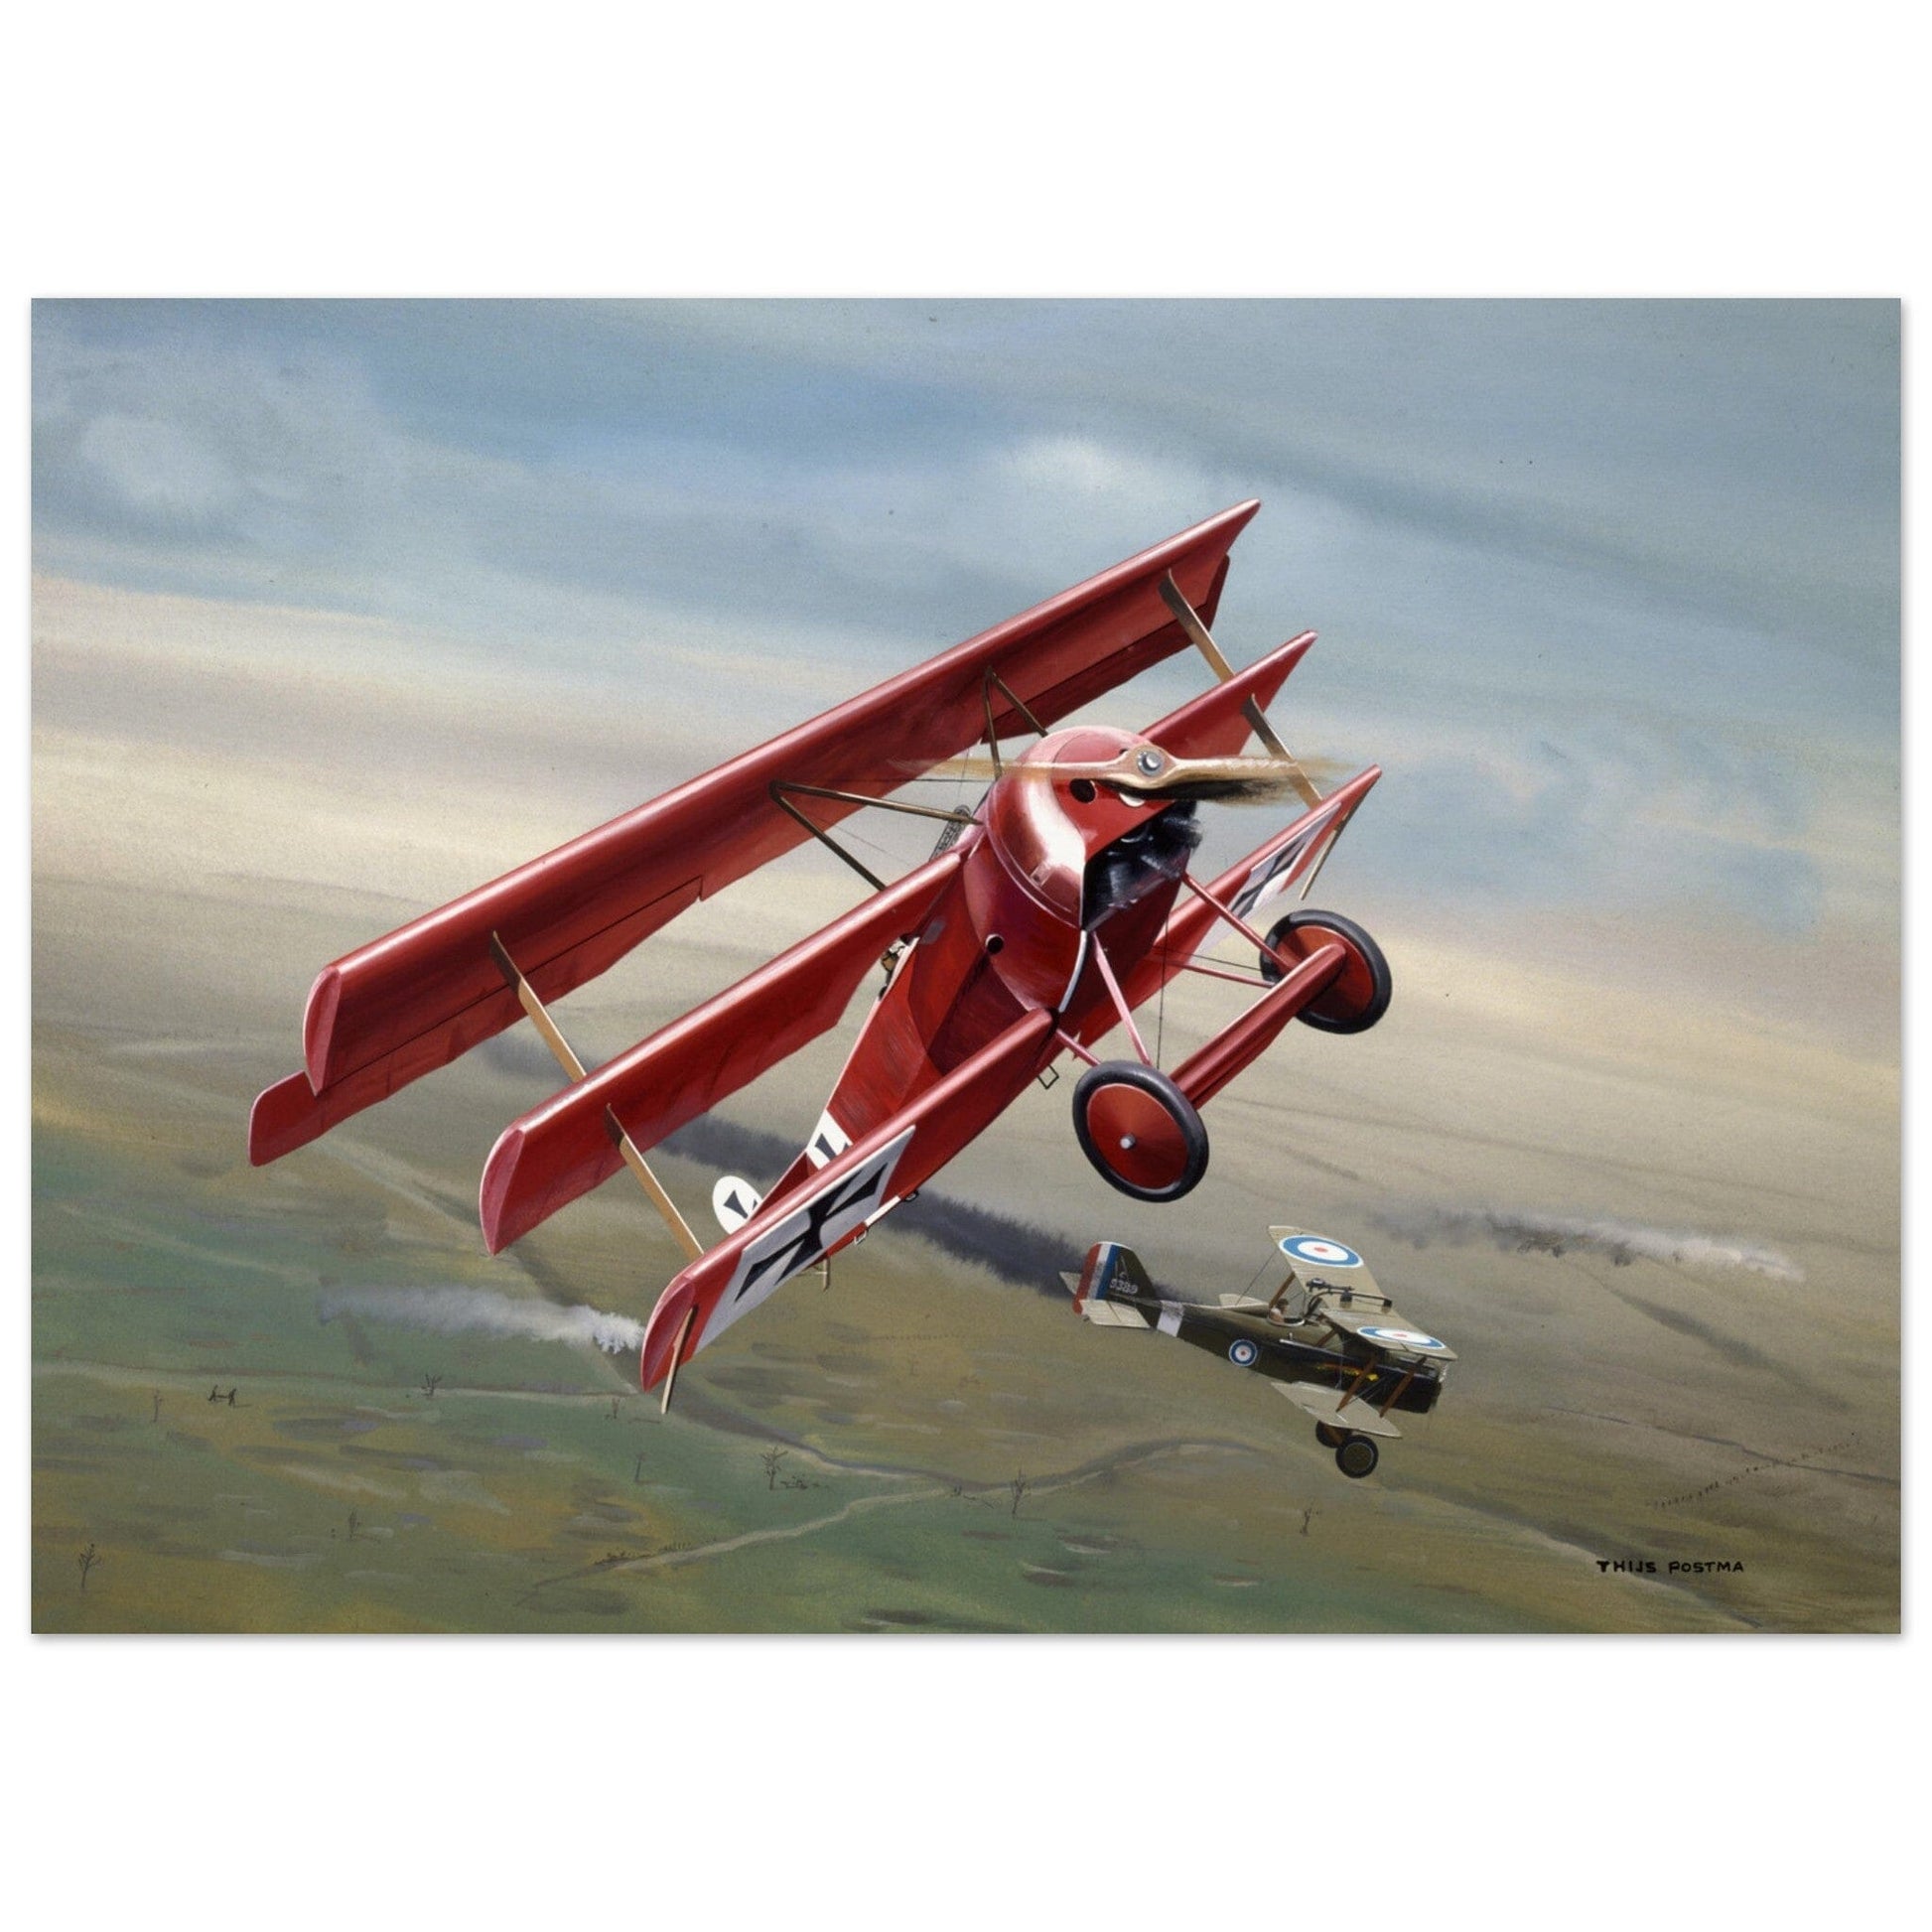 Thijs Postma - Poster - Fokker Dr.I With RAF S.E.5 Poster Only TP Aviation Art 50x70 cm / 20x28″ 